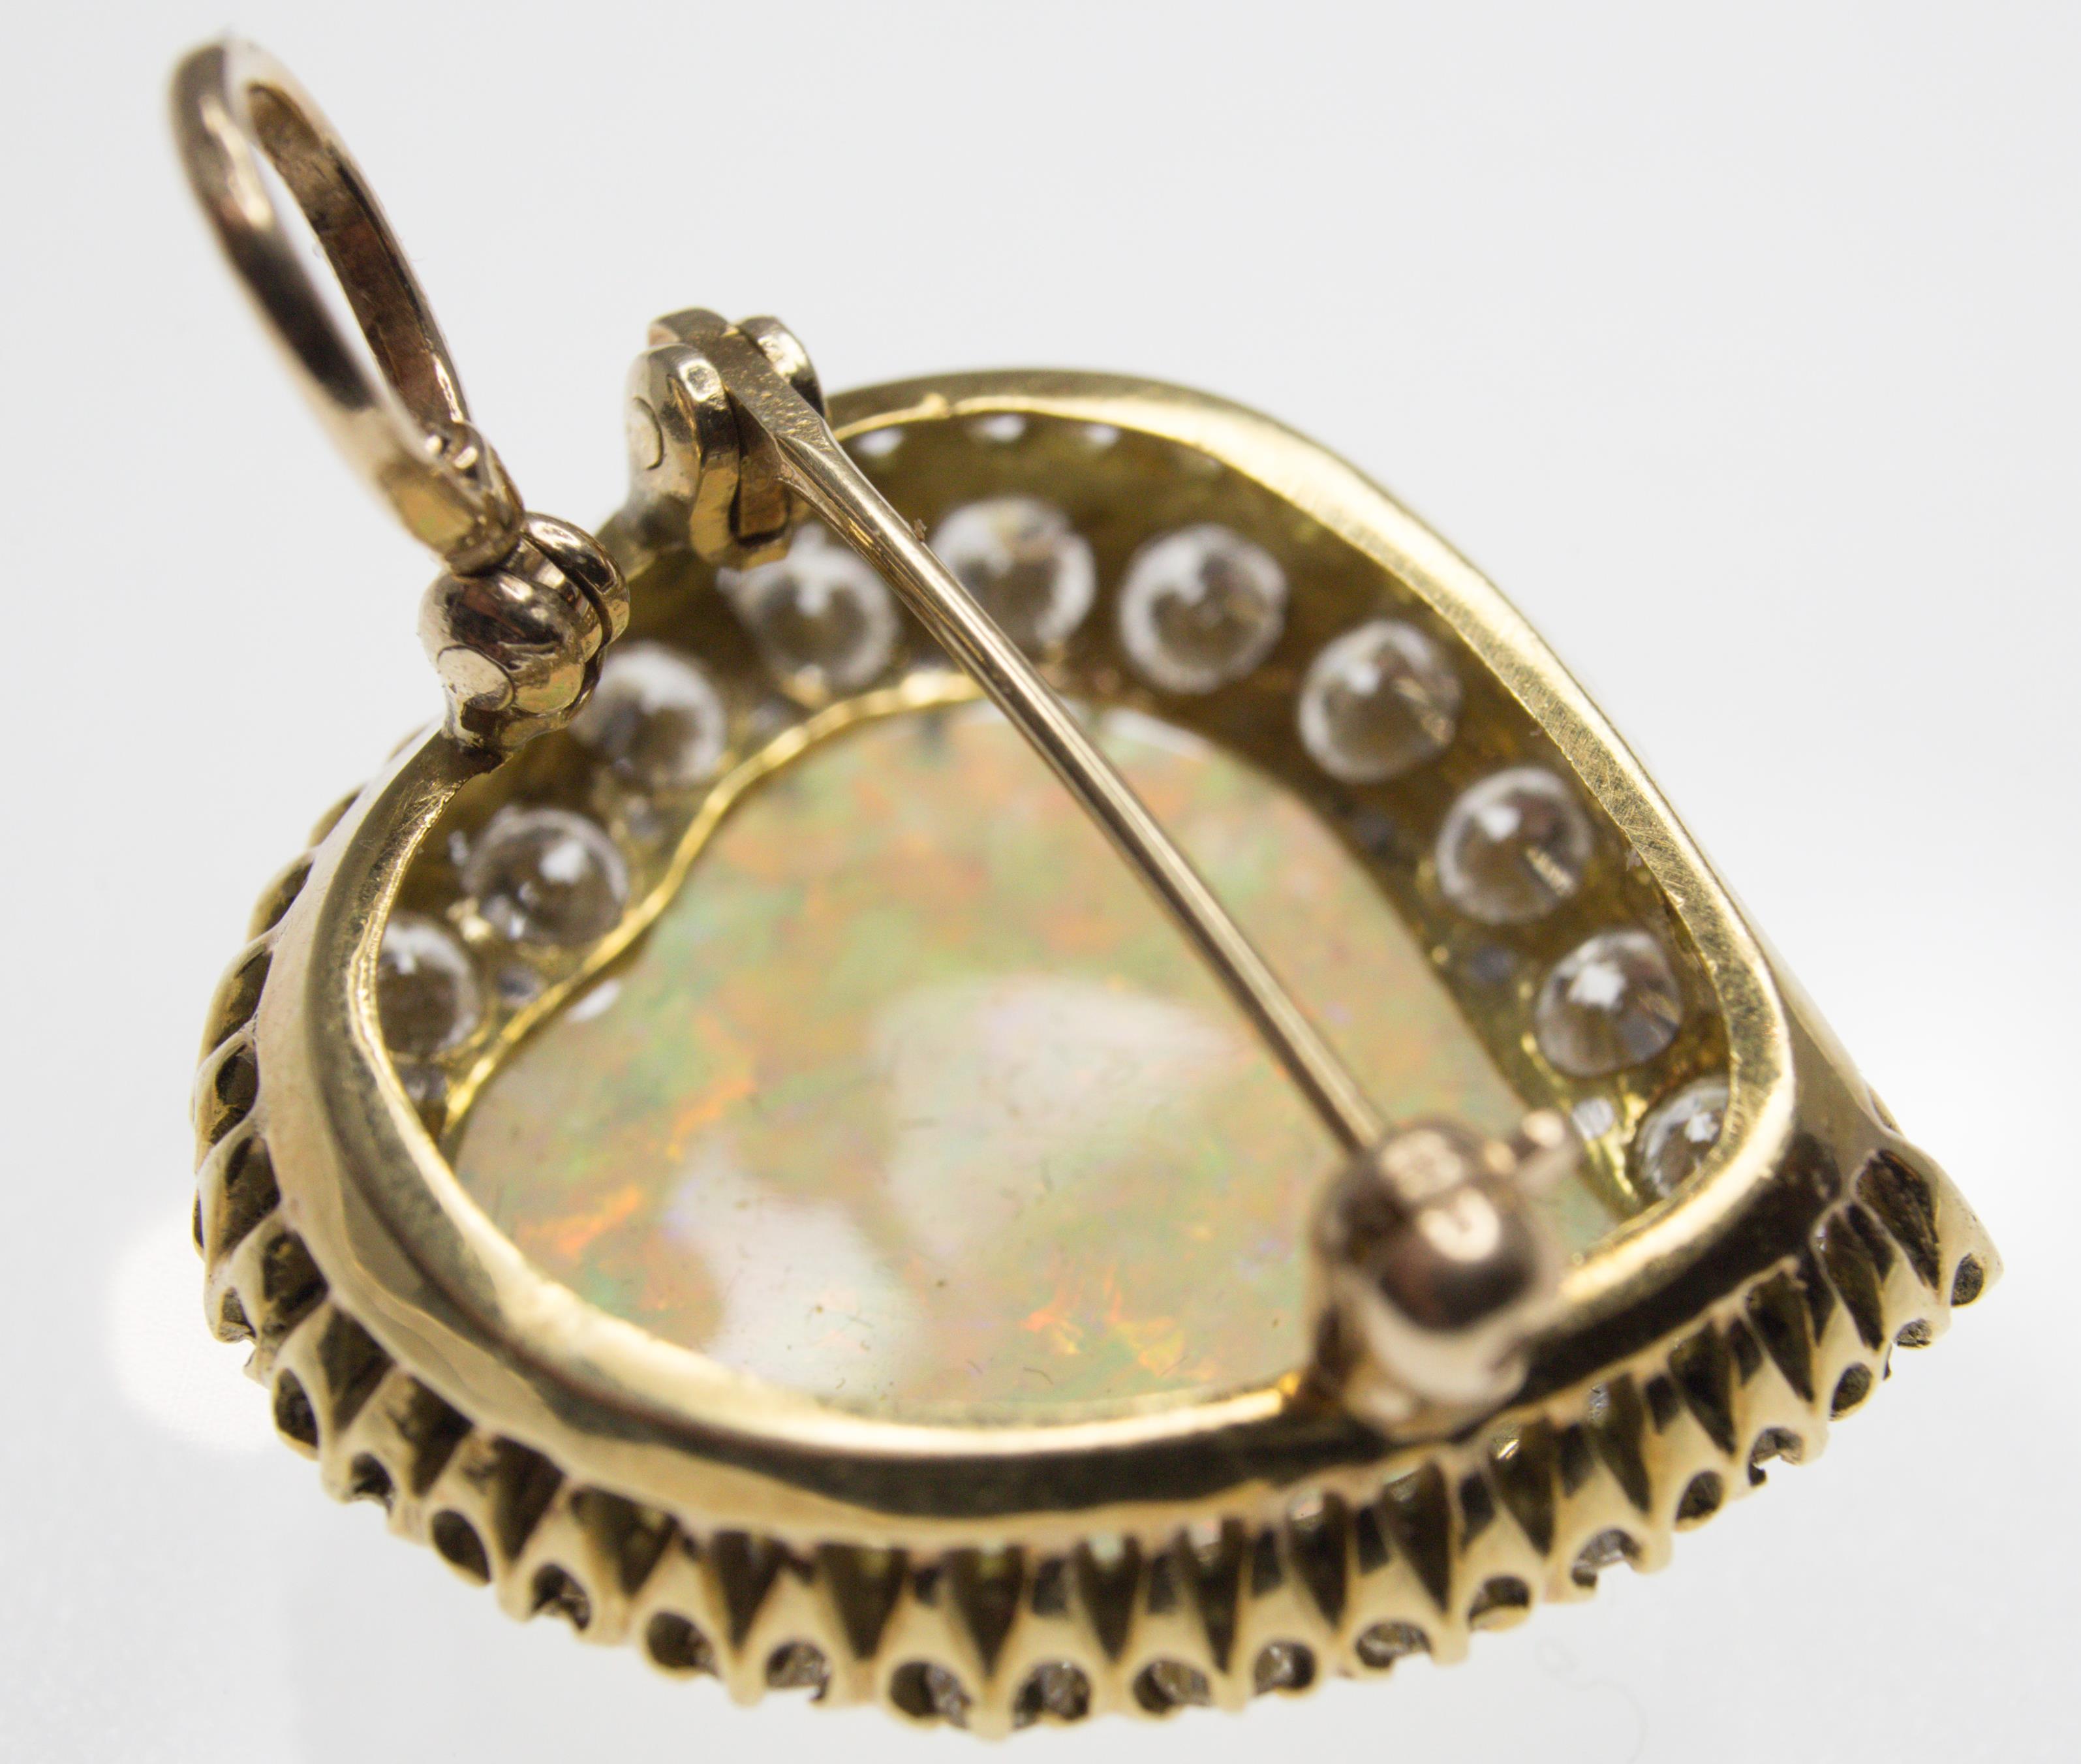 Gold Opal and Diamond Witches Heart Brooch Pendant - Image 5 of 6